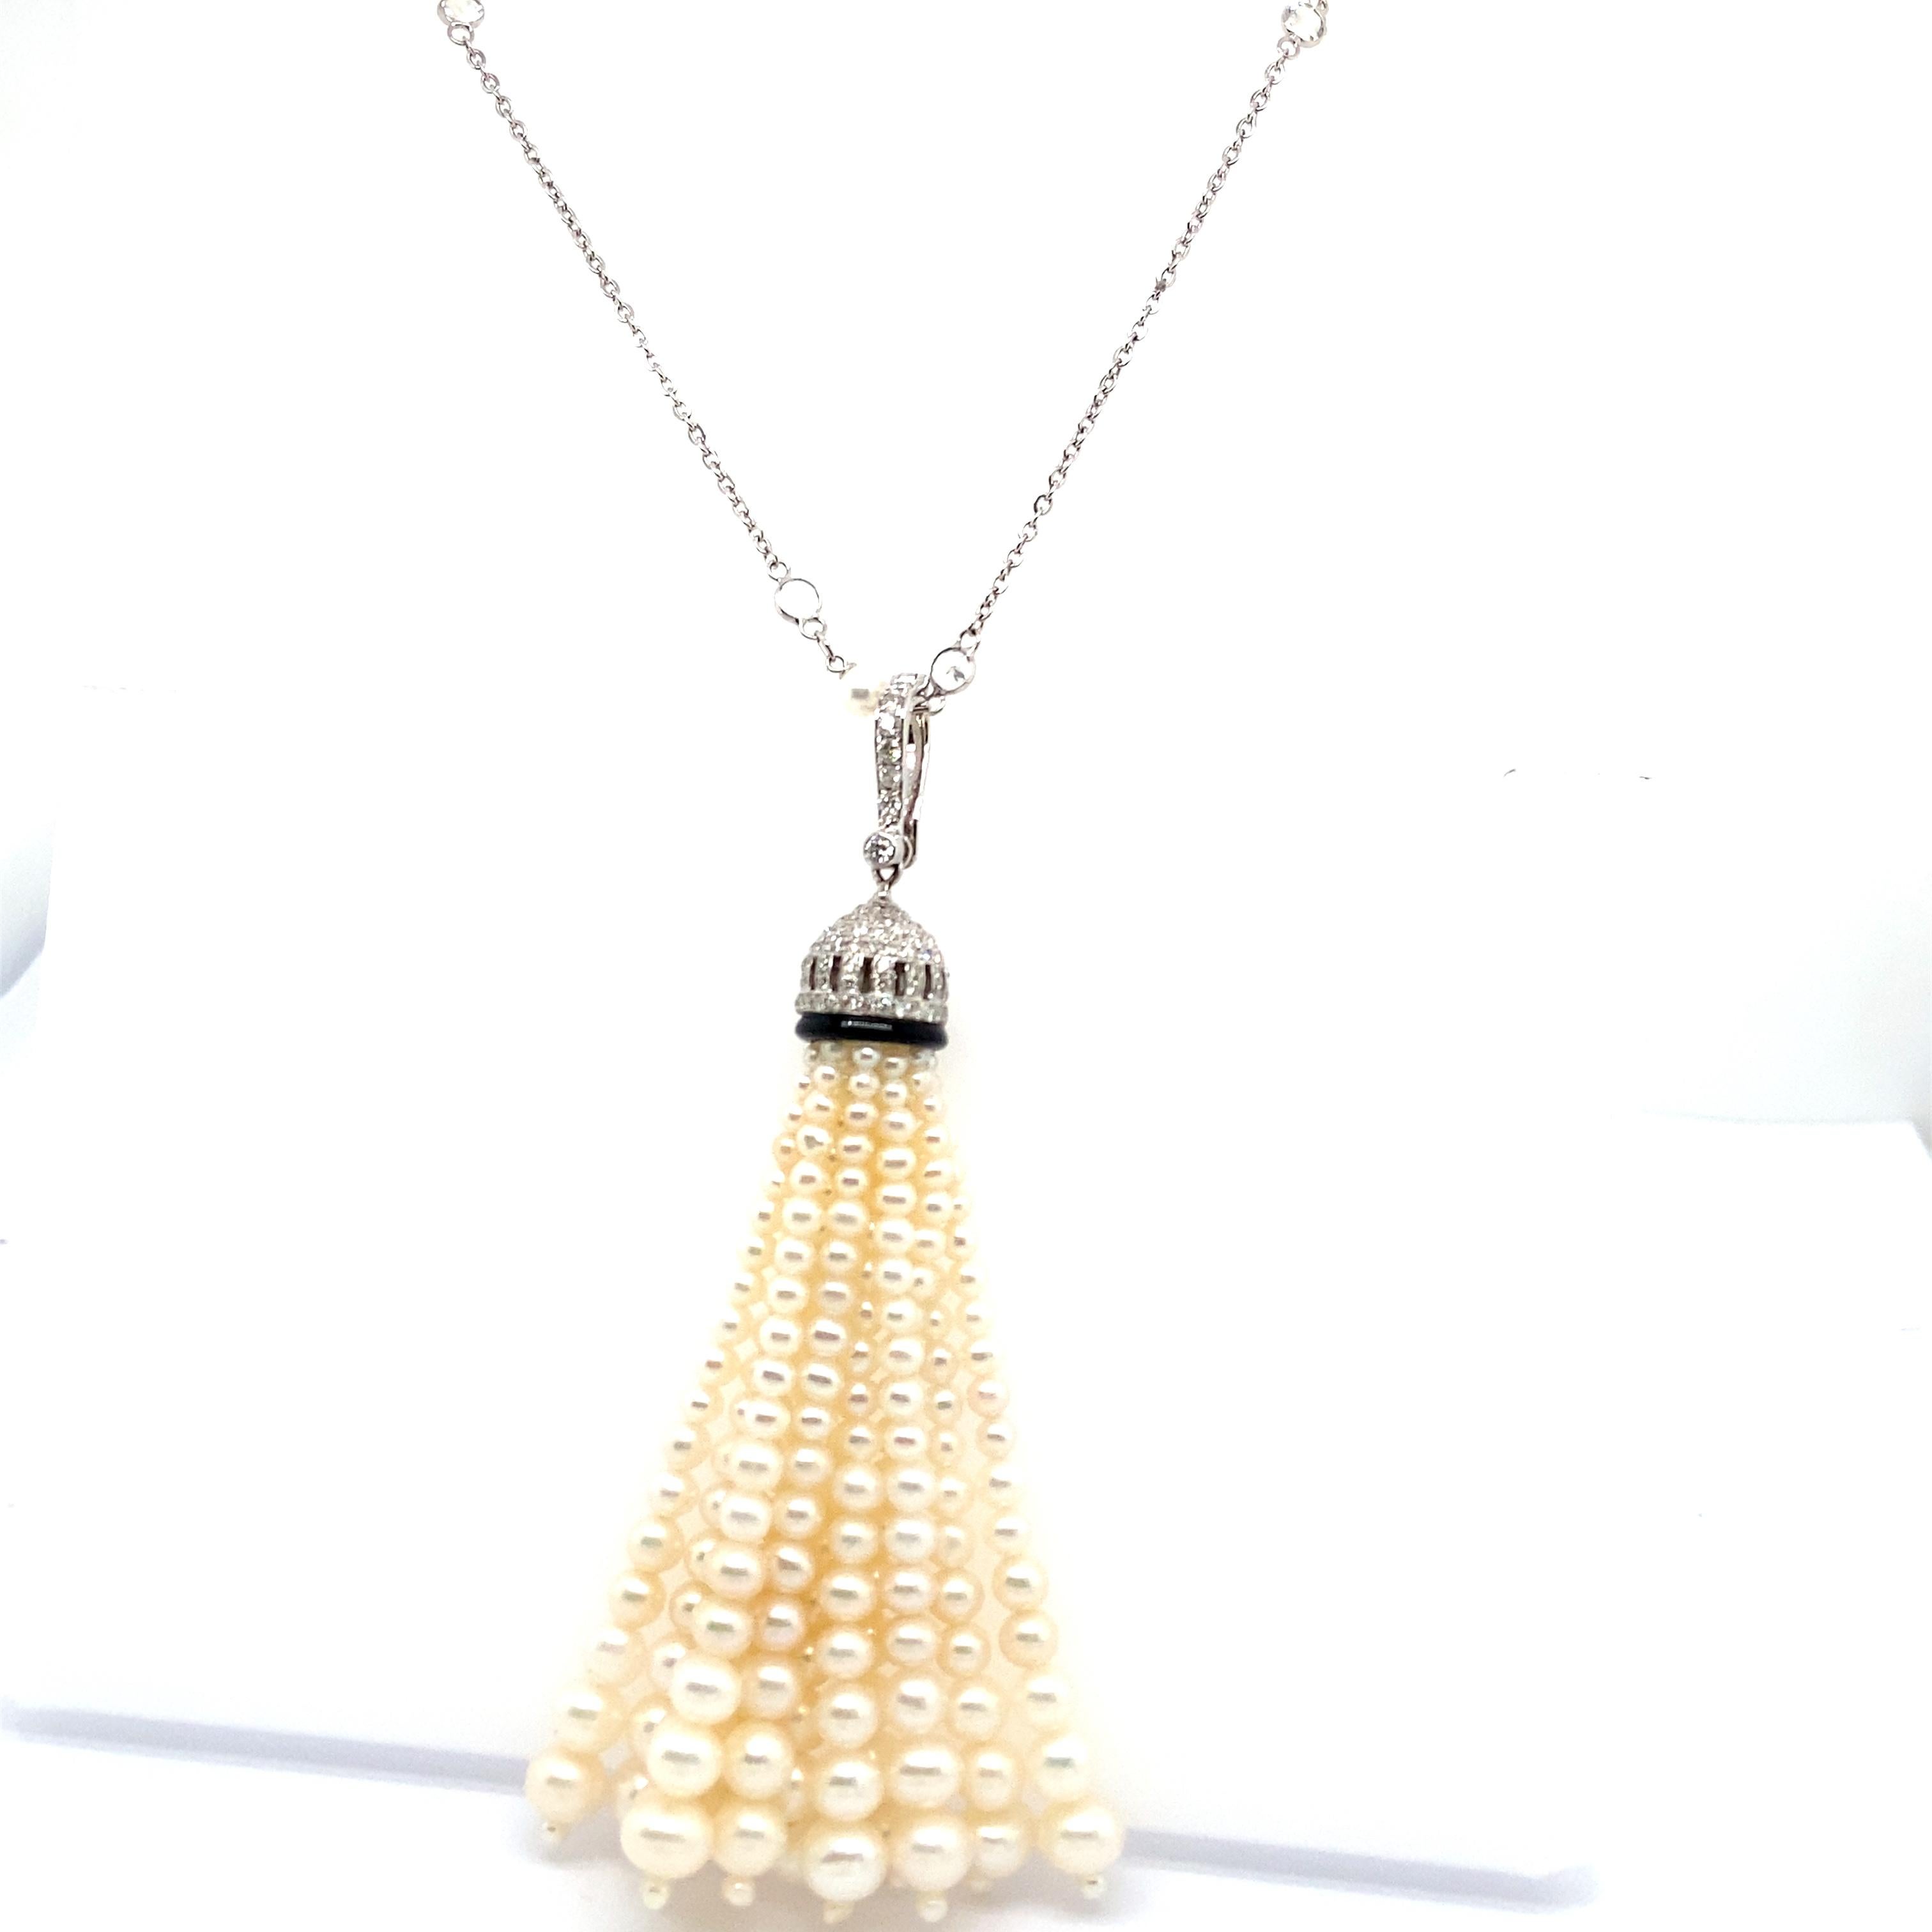 White Pearls, Black Onyx, and White Diamond Gold Tassel Necklace:

An elegant tassel necklace, it features a black onyx situated underneath the diamond cup, along with white pearls weighing 12.17 carat, and white diamonds weighing 0.67 carat. The